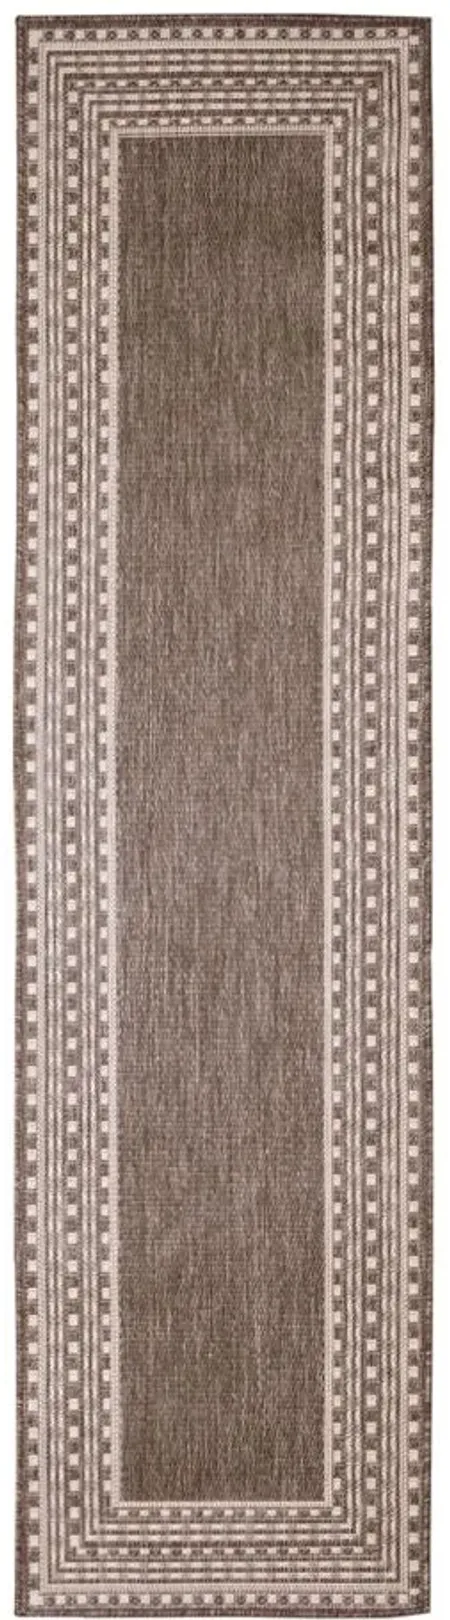 Liora Manne Malibu Etched Border Indoor/Outdoor Runner Rug in Neutral by Trans-Ocean Import Co Inc